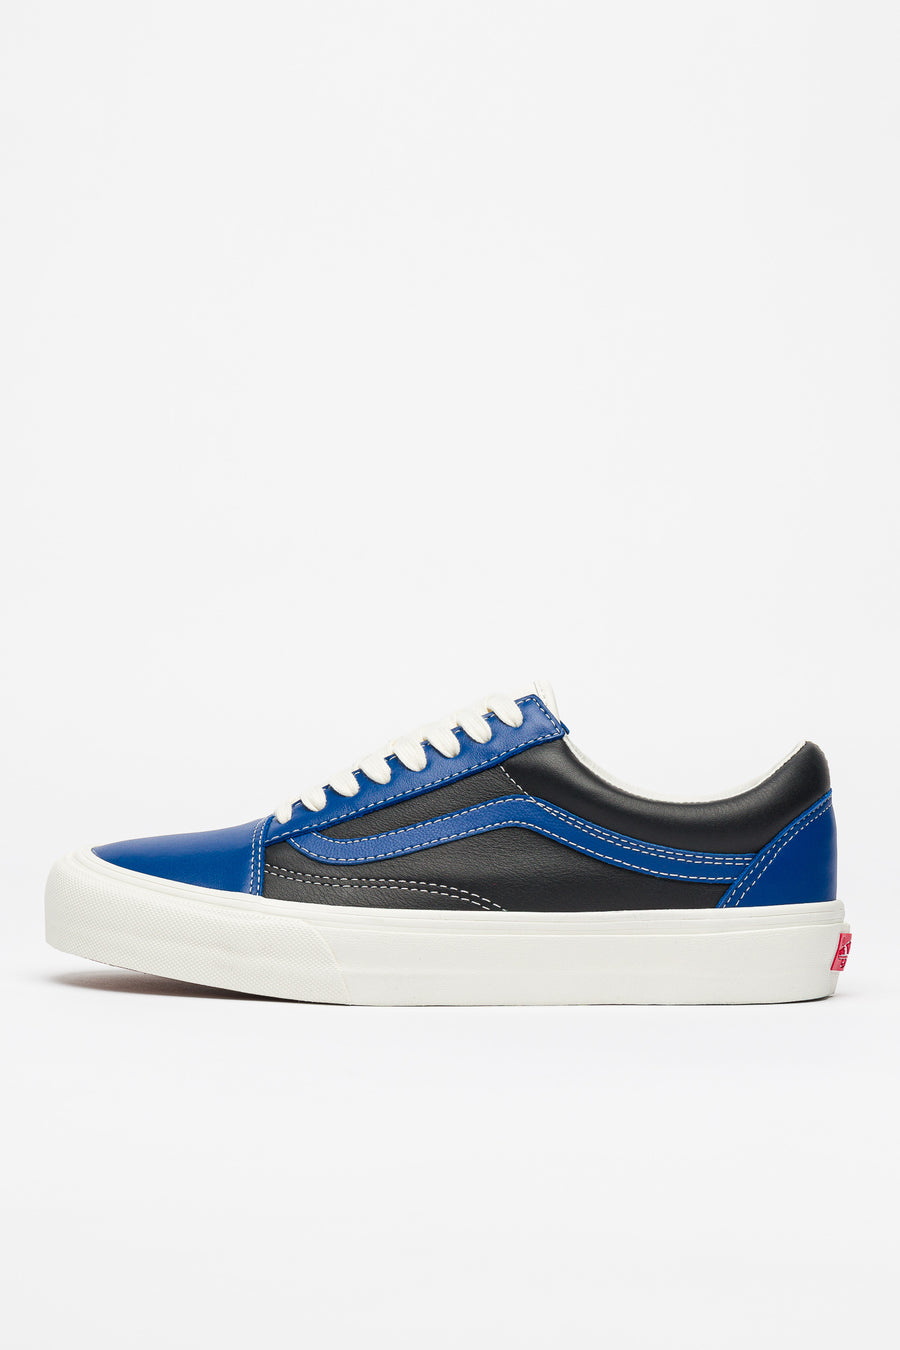 blue and leather vans